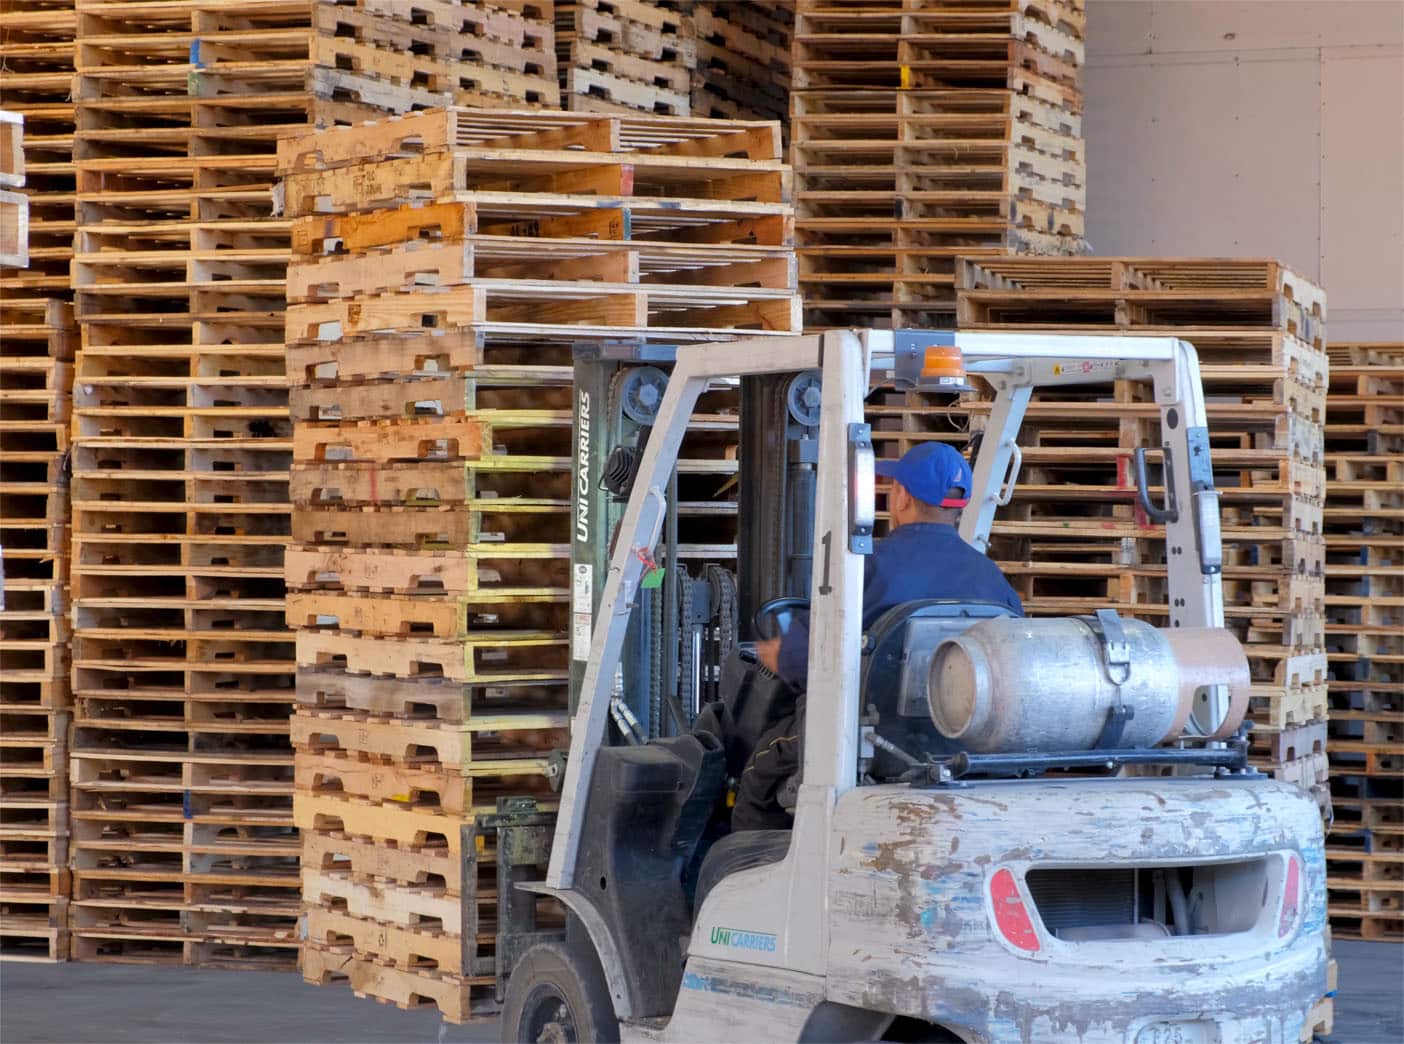 A forklift driver moving some wooden pallets